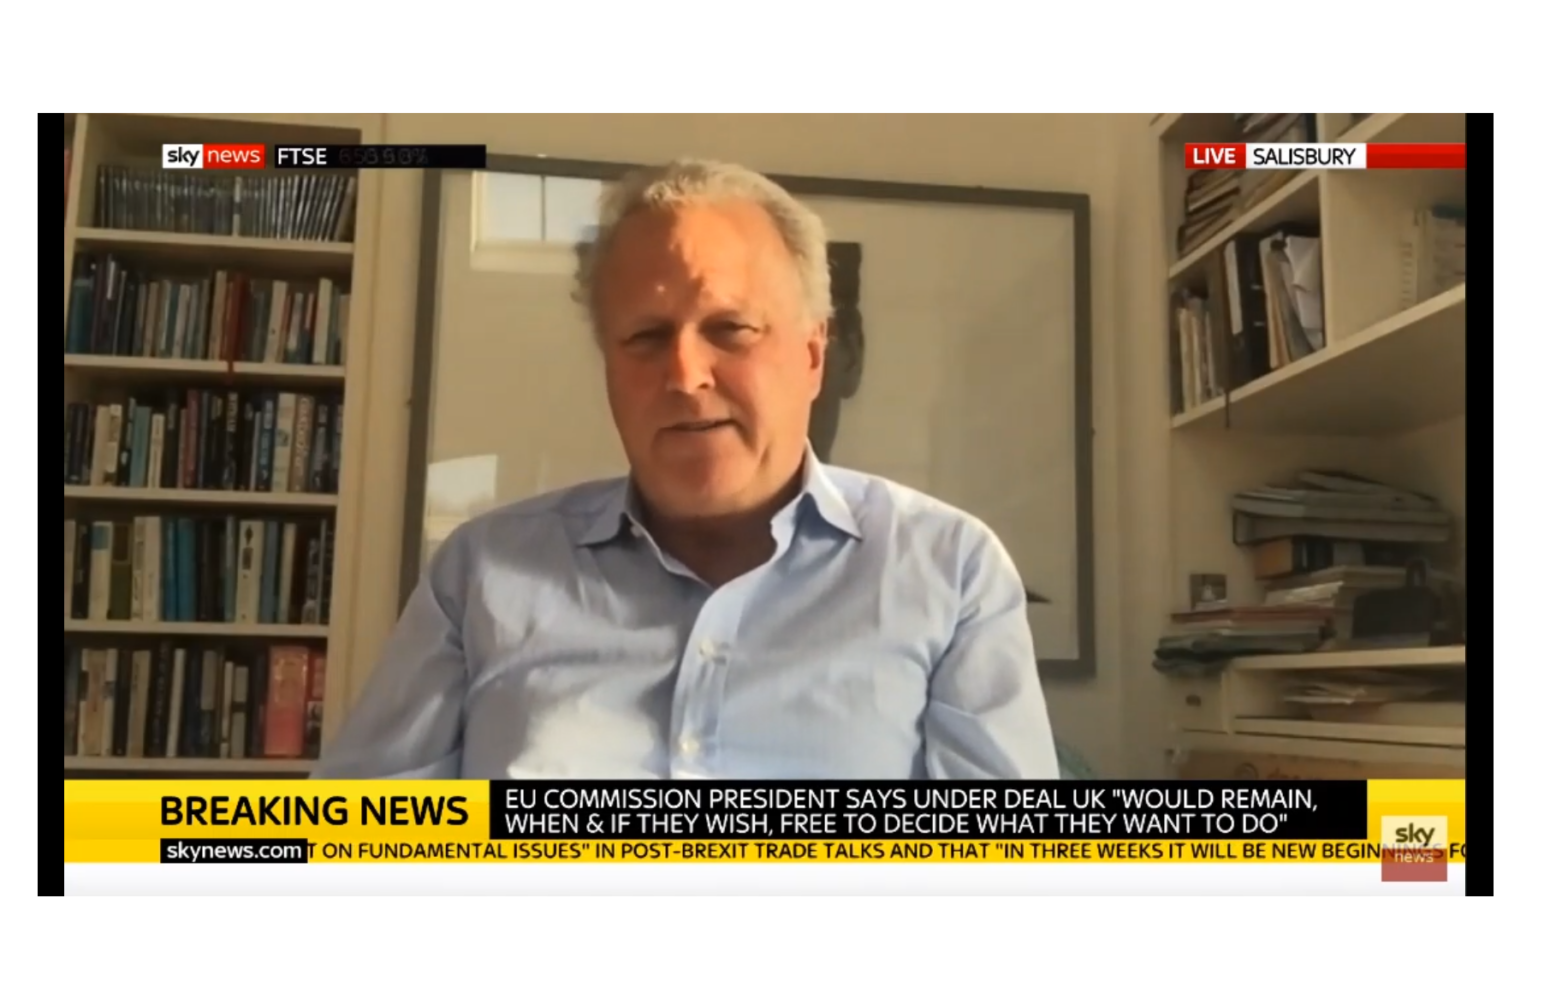 CWEIC Chairman Lord Marland interviewed on Sky News